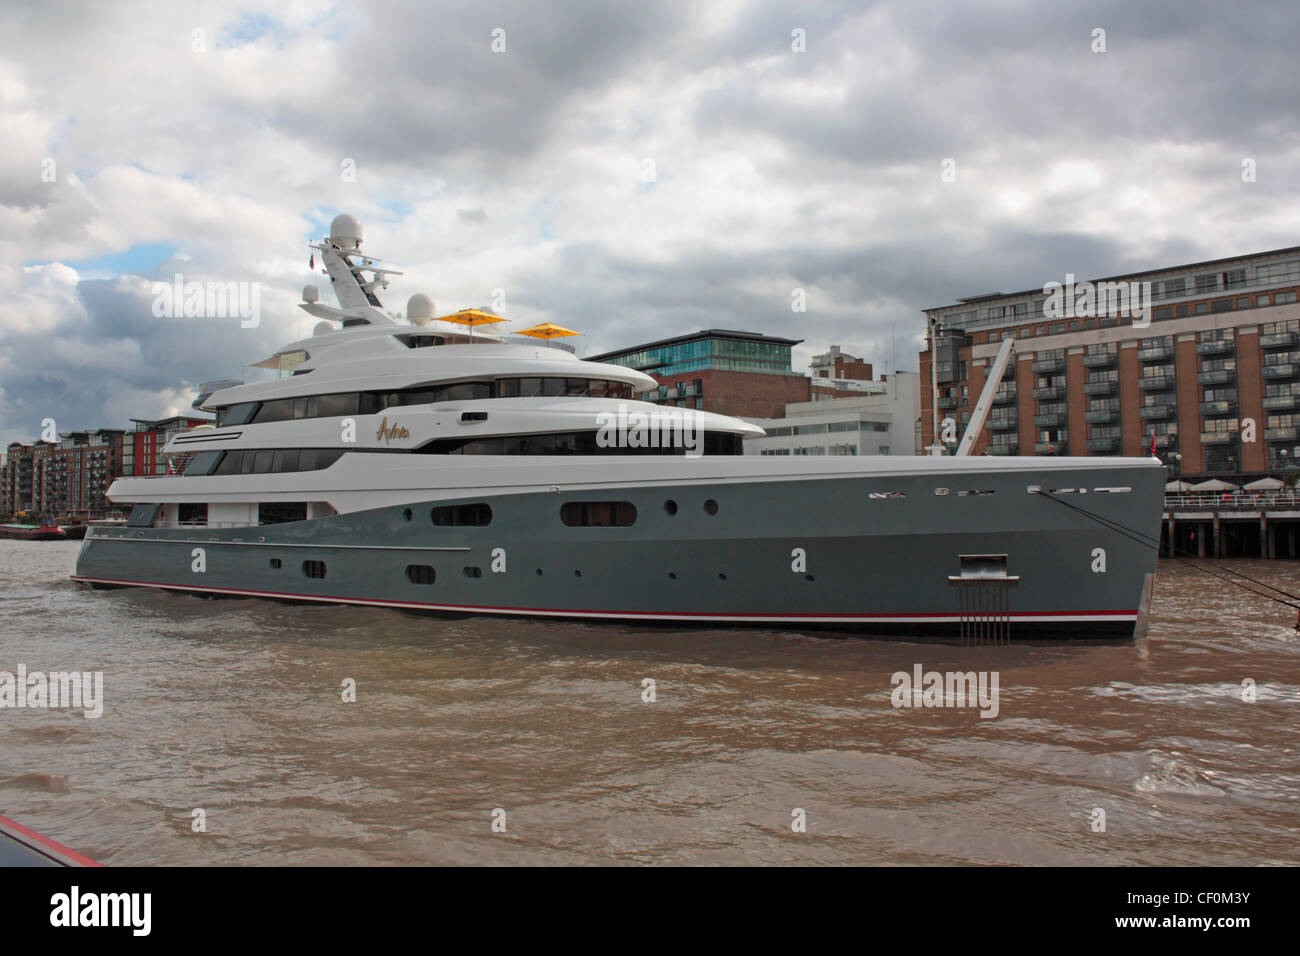 The 68m Abeking and Rasmussen luxury yacht Aviva moored in the Thames Stock Photo